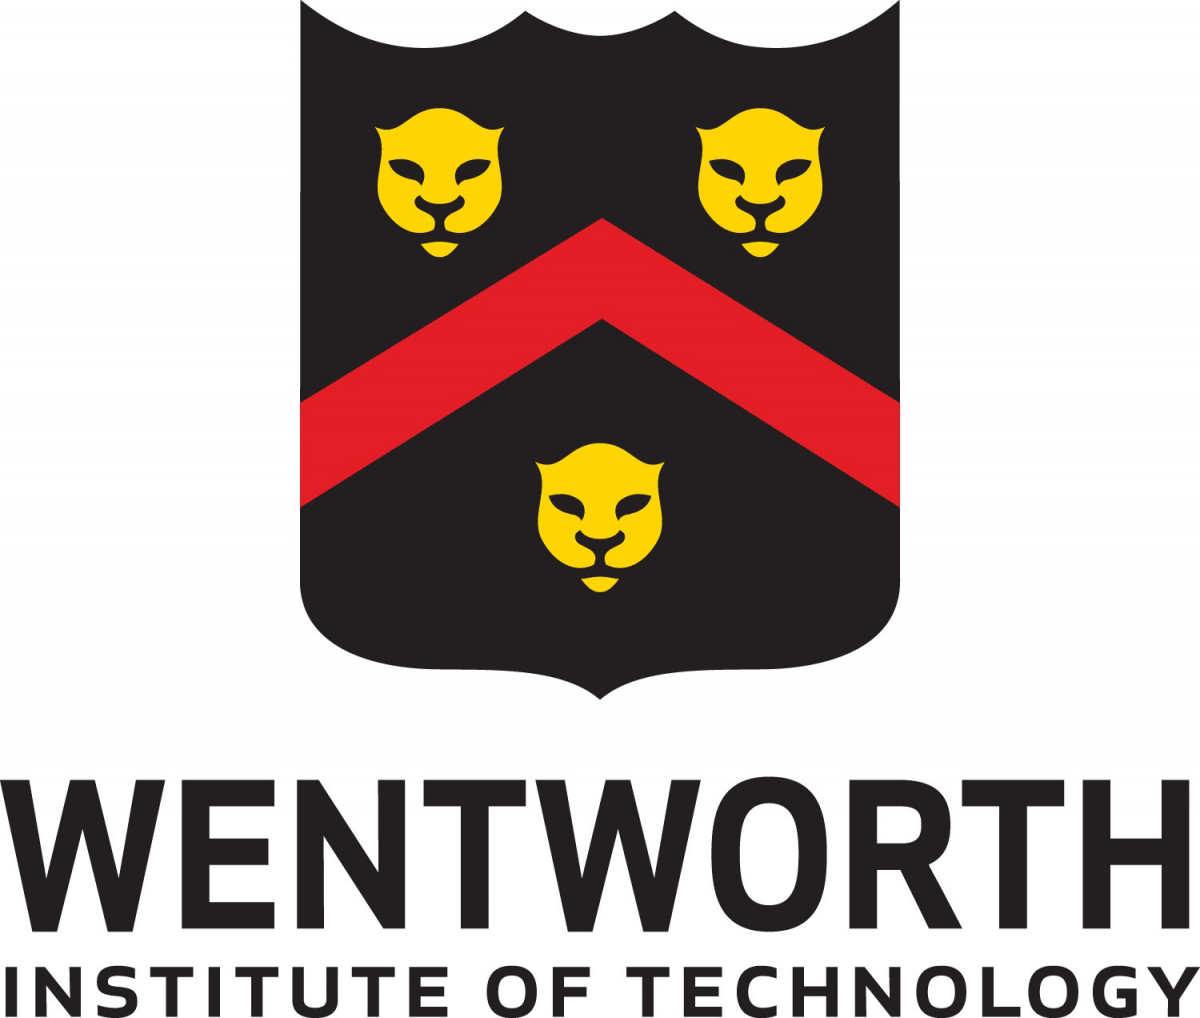 Wentworth Logo - Branding Guidelines. Wentworth Institute of Technology